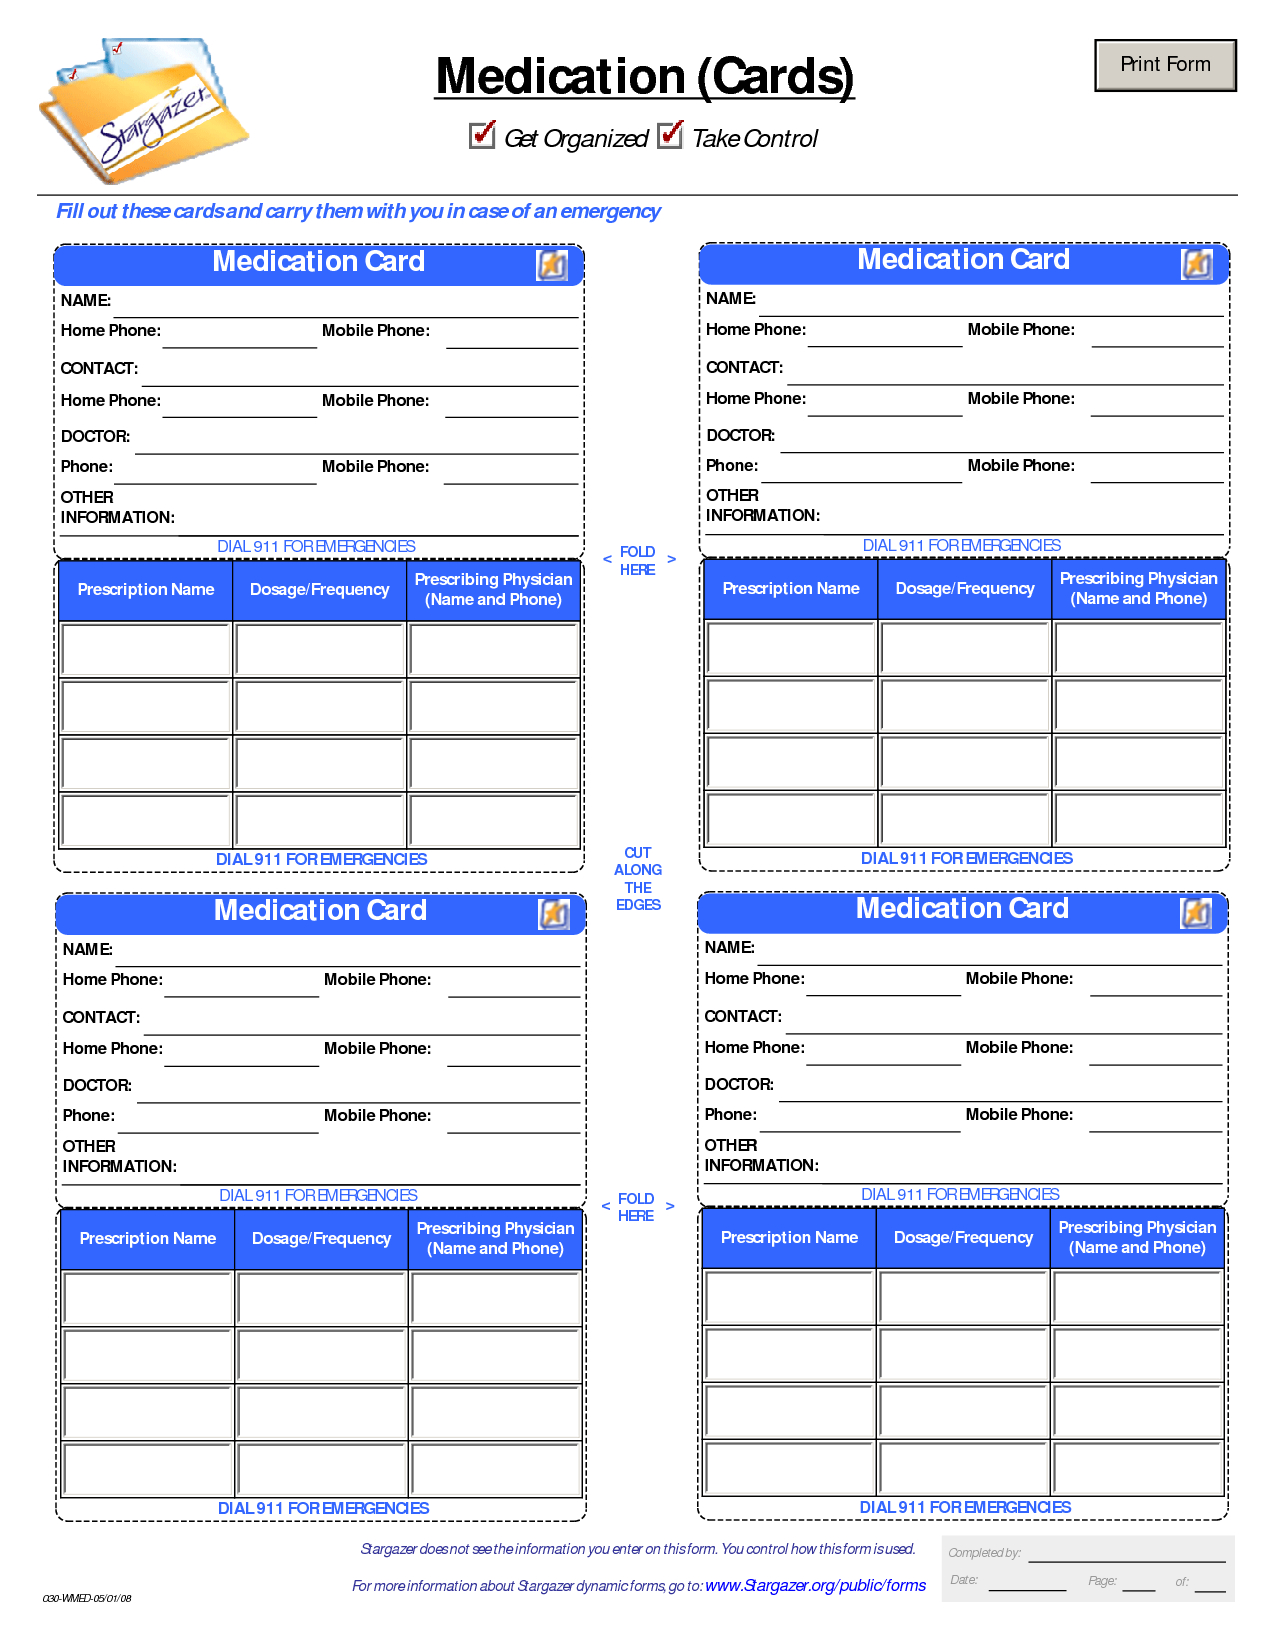 Patient Medication Card Template | Medication List, Medical Pertaining To Med Cards Template